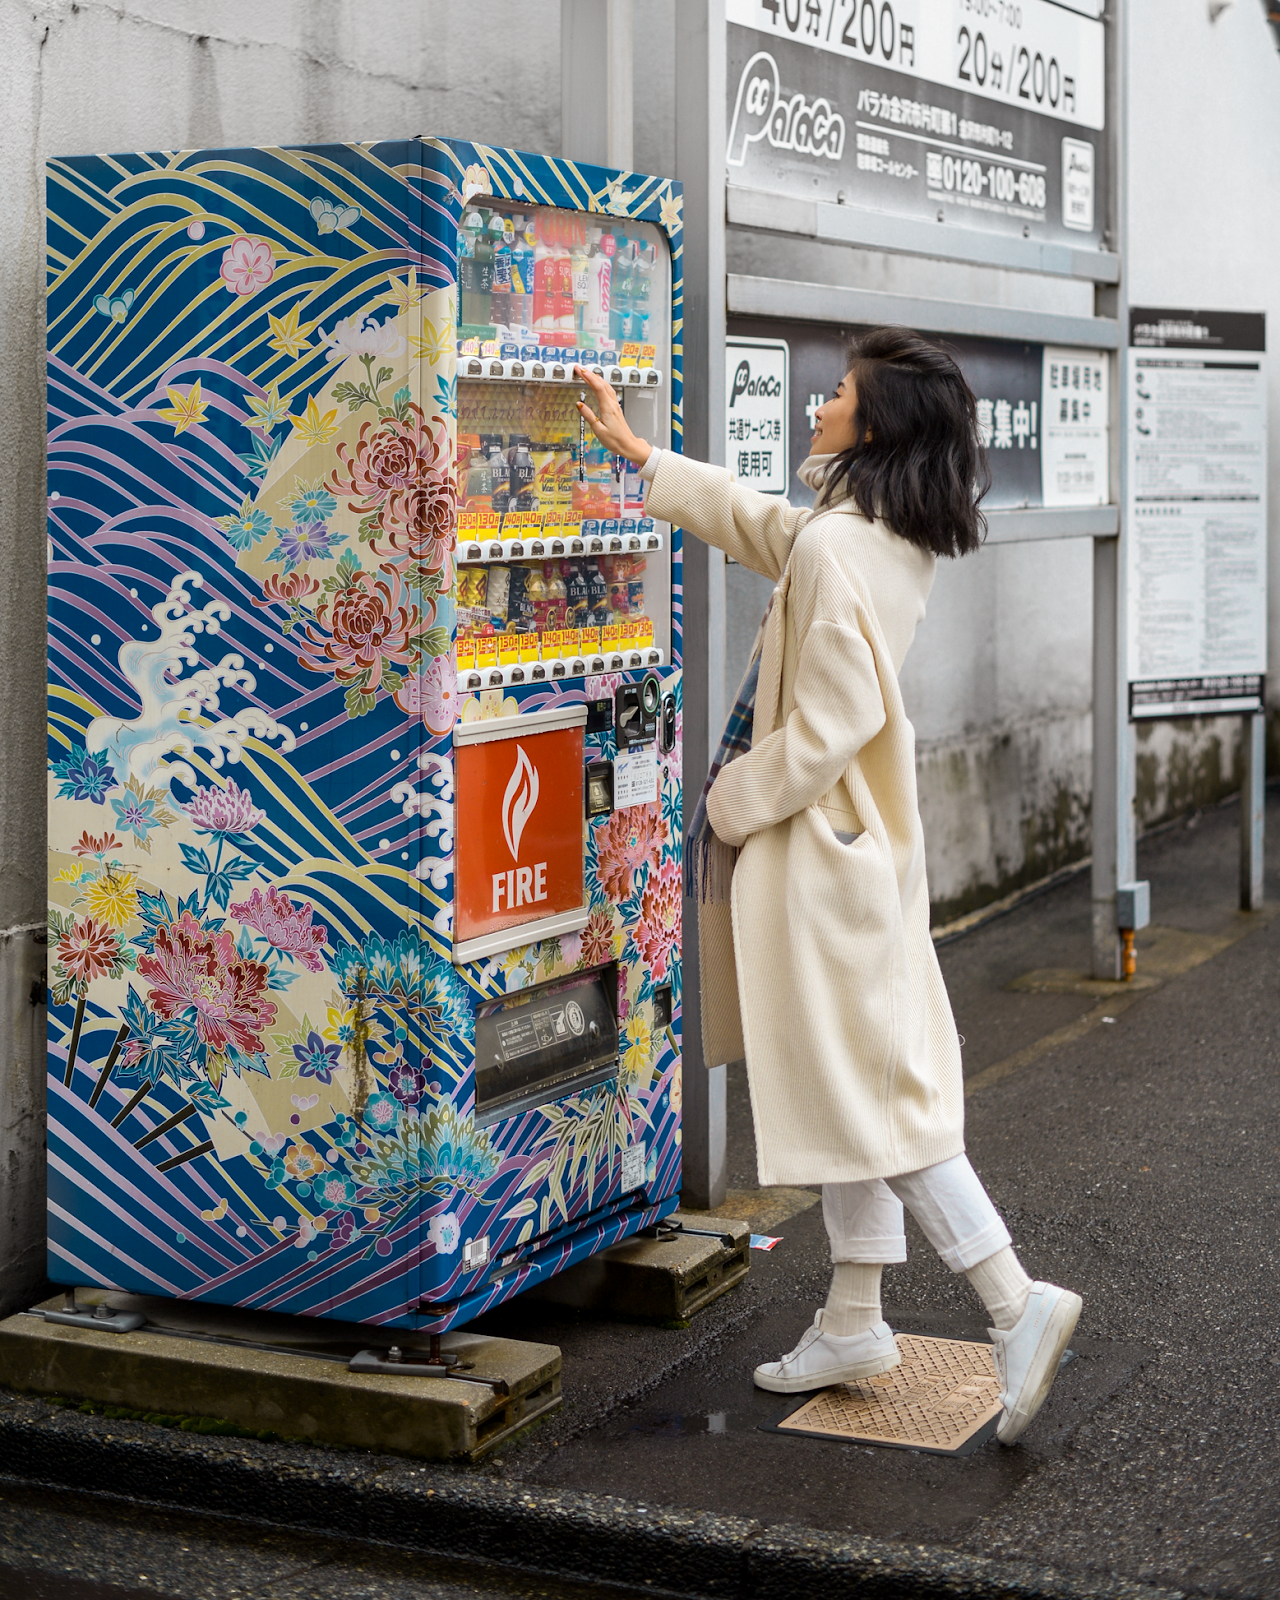 Unique Vending Machine in Kanazawa, Kanazawa trip from Tokyo, must-visit cities in Japan, Nishi Chaya District, Higashi Chaya District, photogenic and charming towns in Japan - FOREVERVANNY